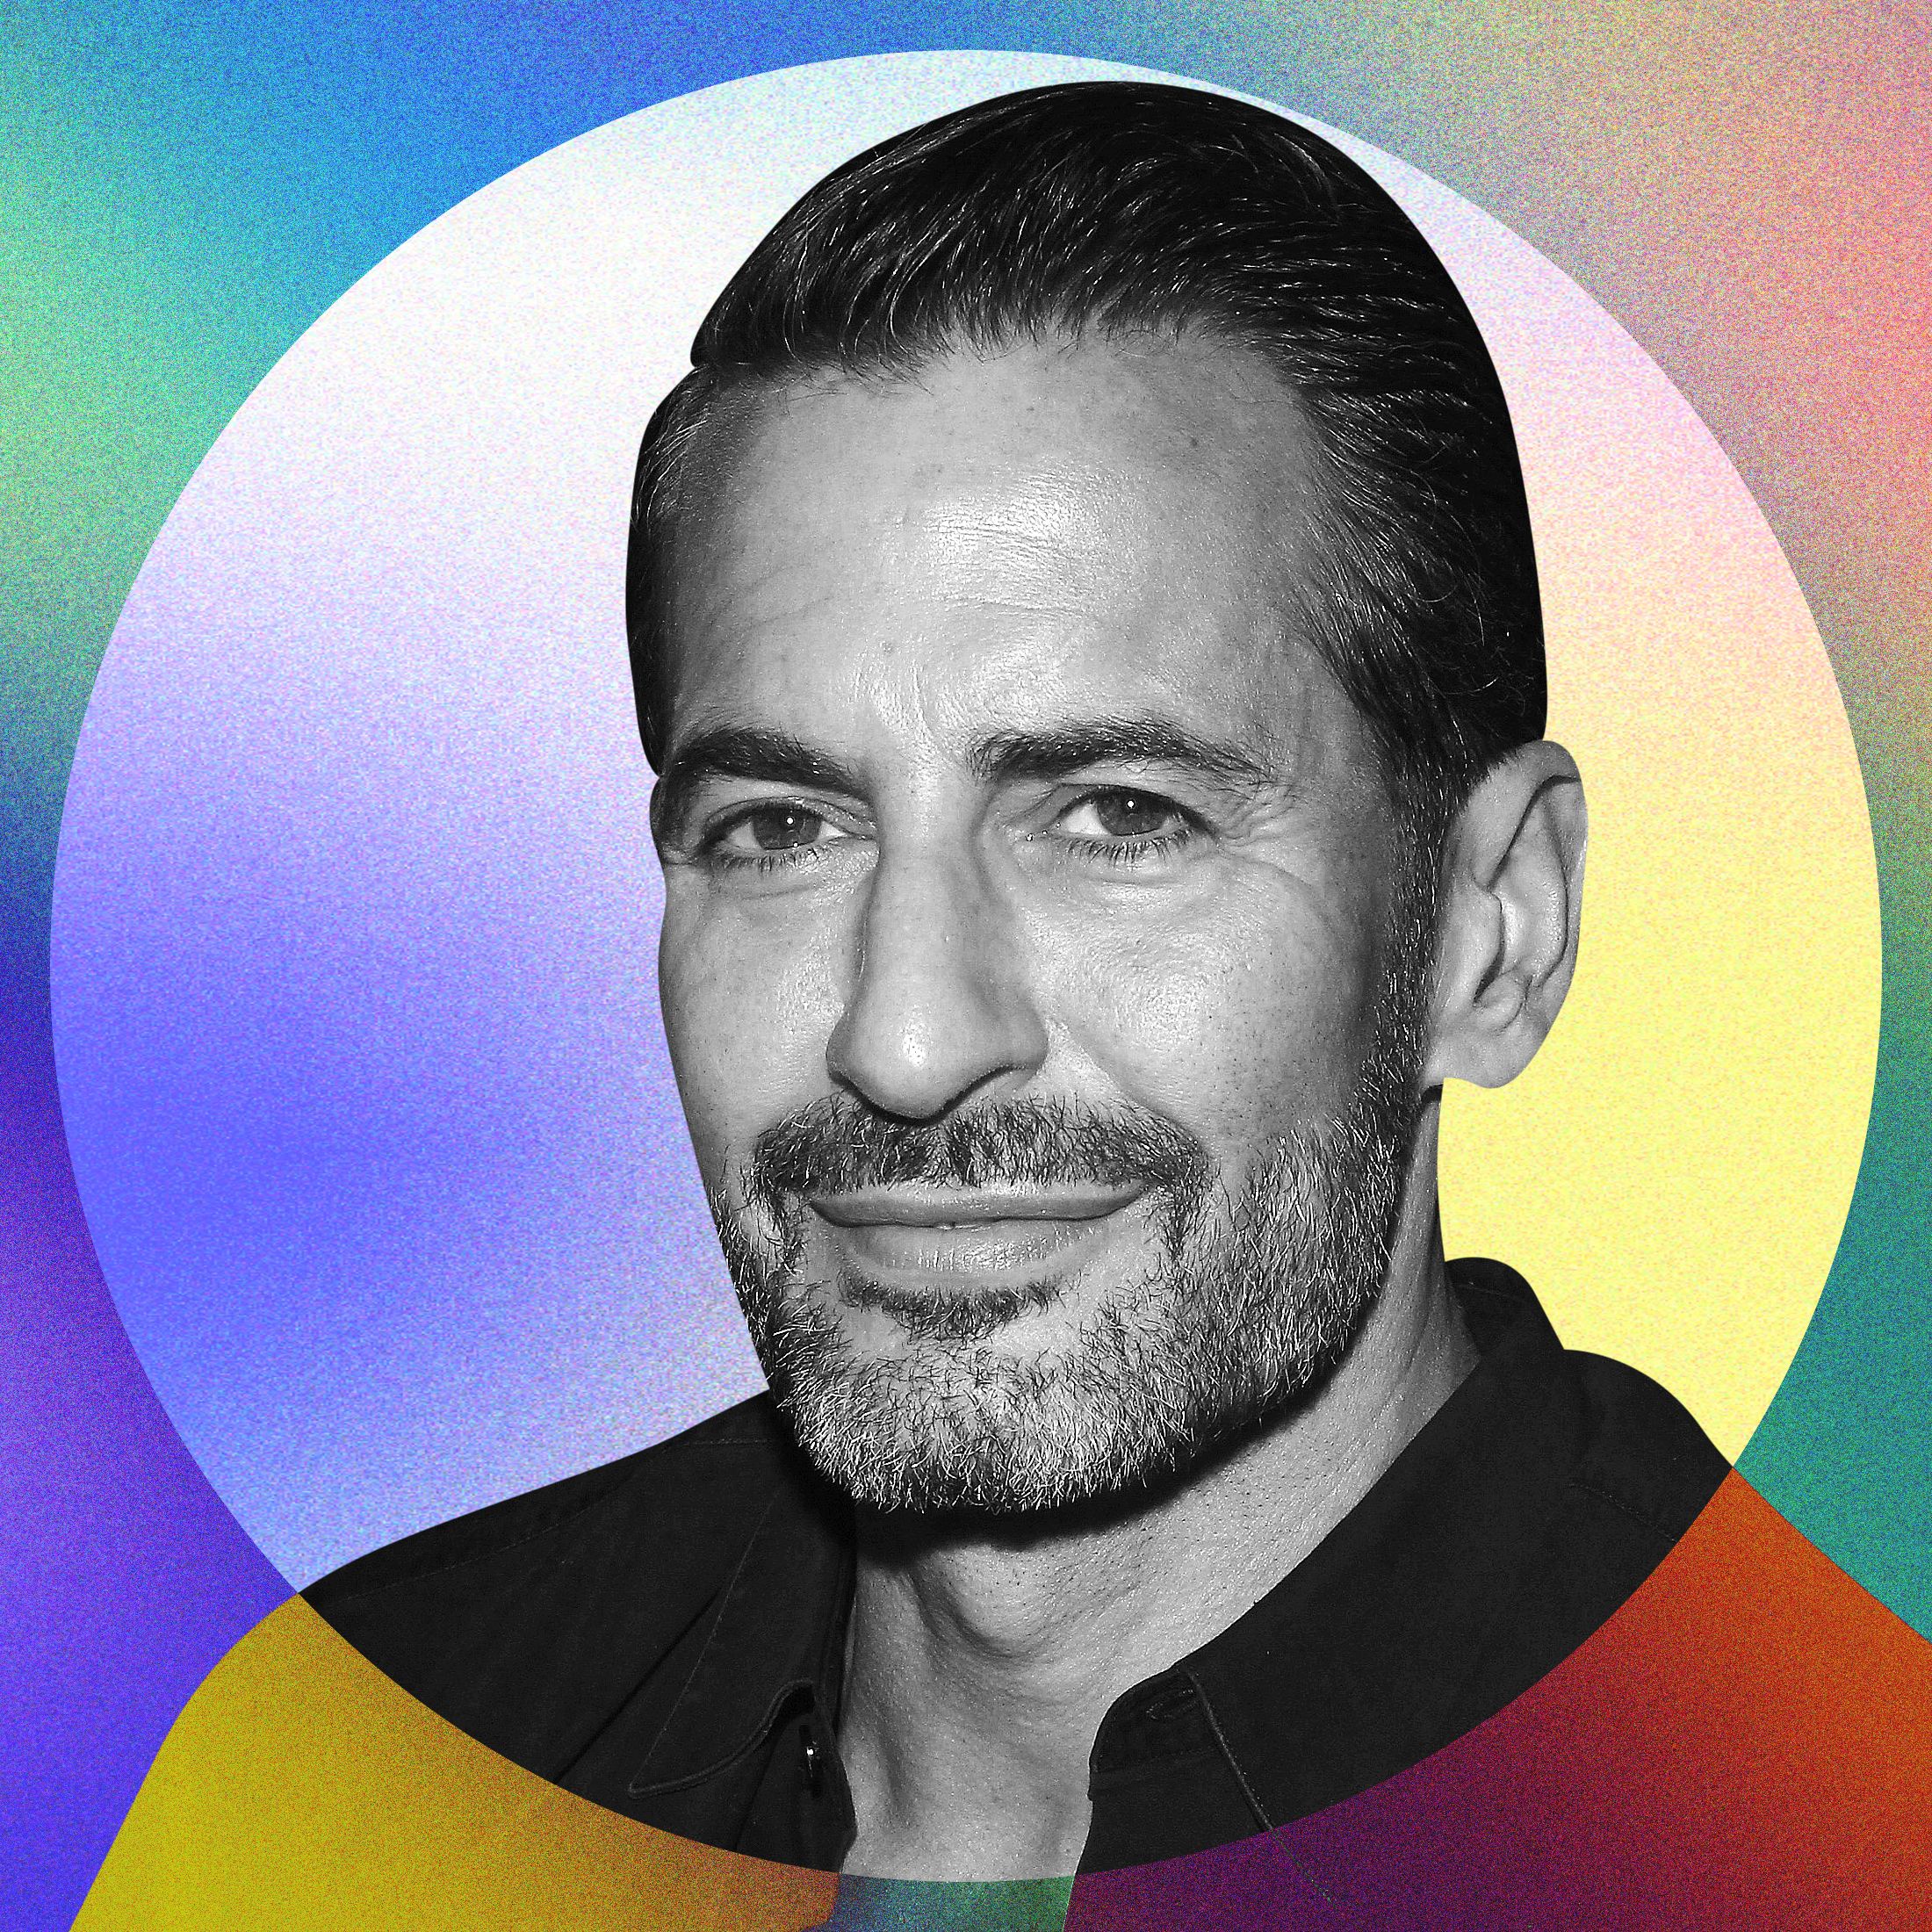 marc jacobs is now 30 dollars｜TikTok Search